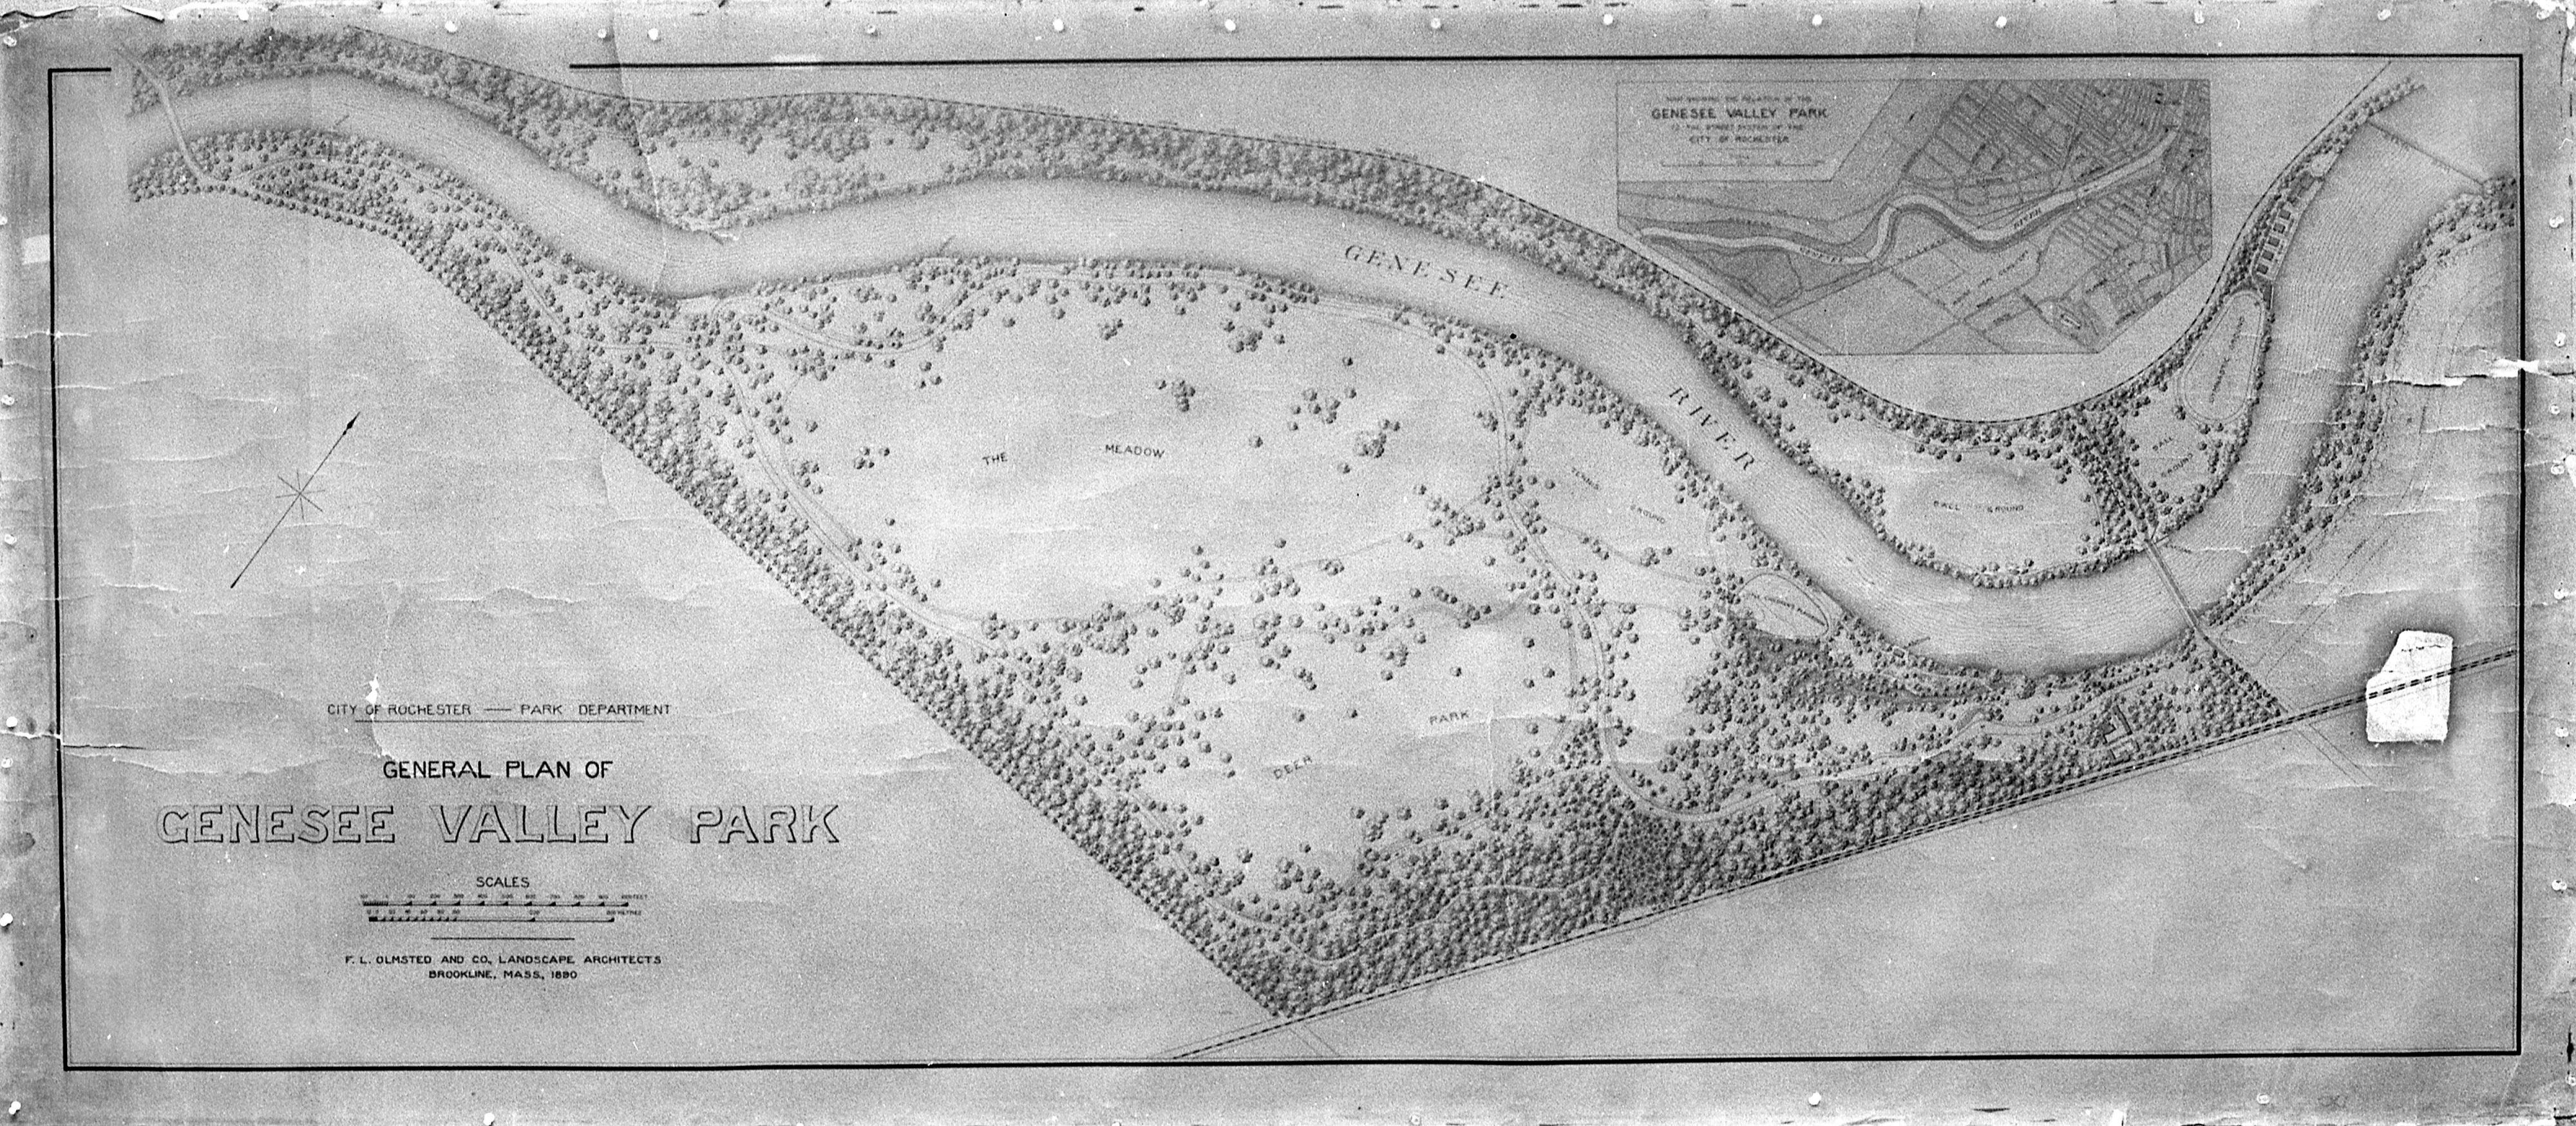 Original plan drawing of Genesee Valley Park by Frederick Law Olmsted & Co.